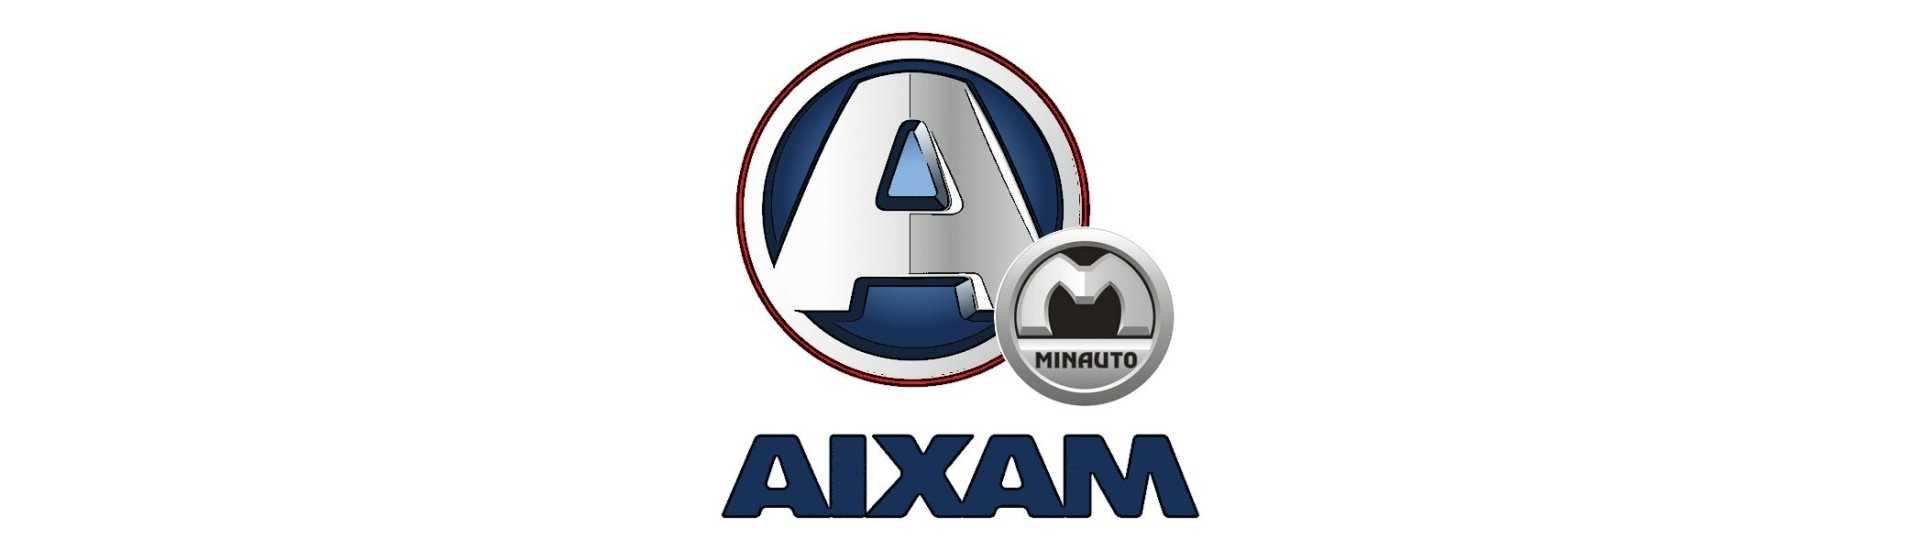 Brake hose at the best car price without a permit Aixam Minauto